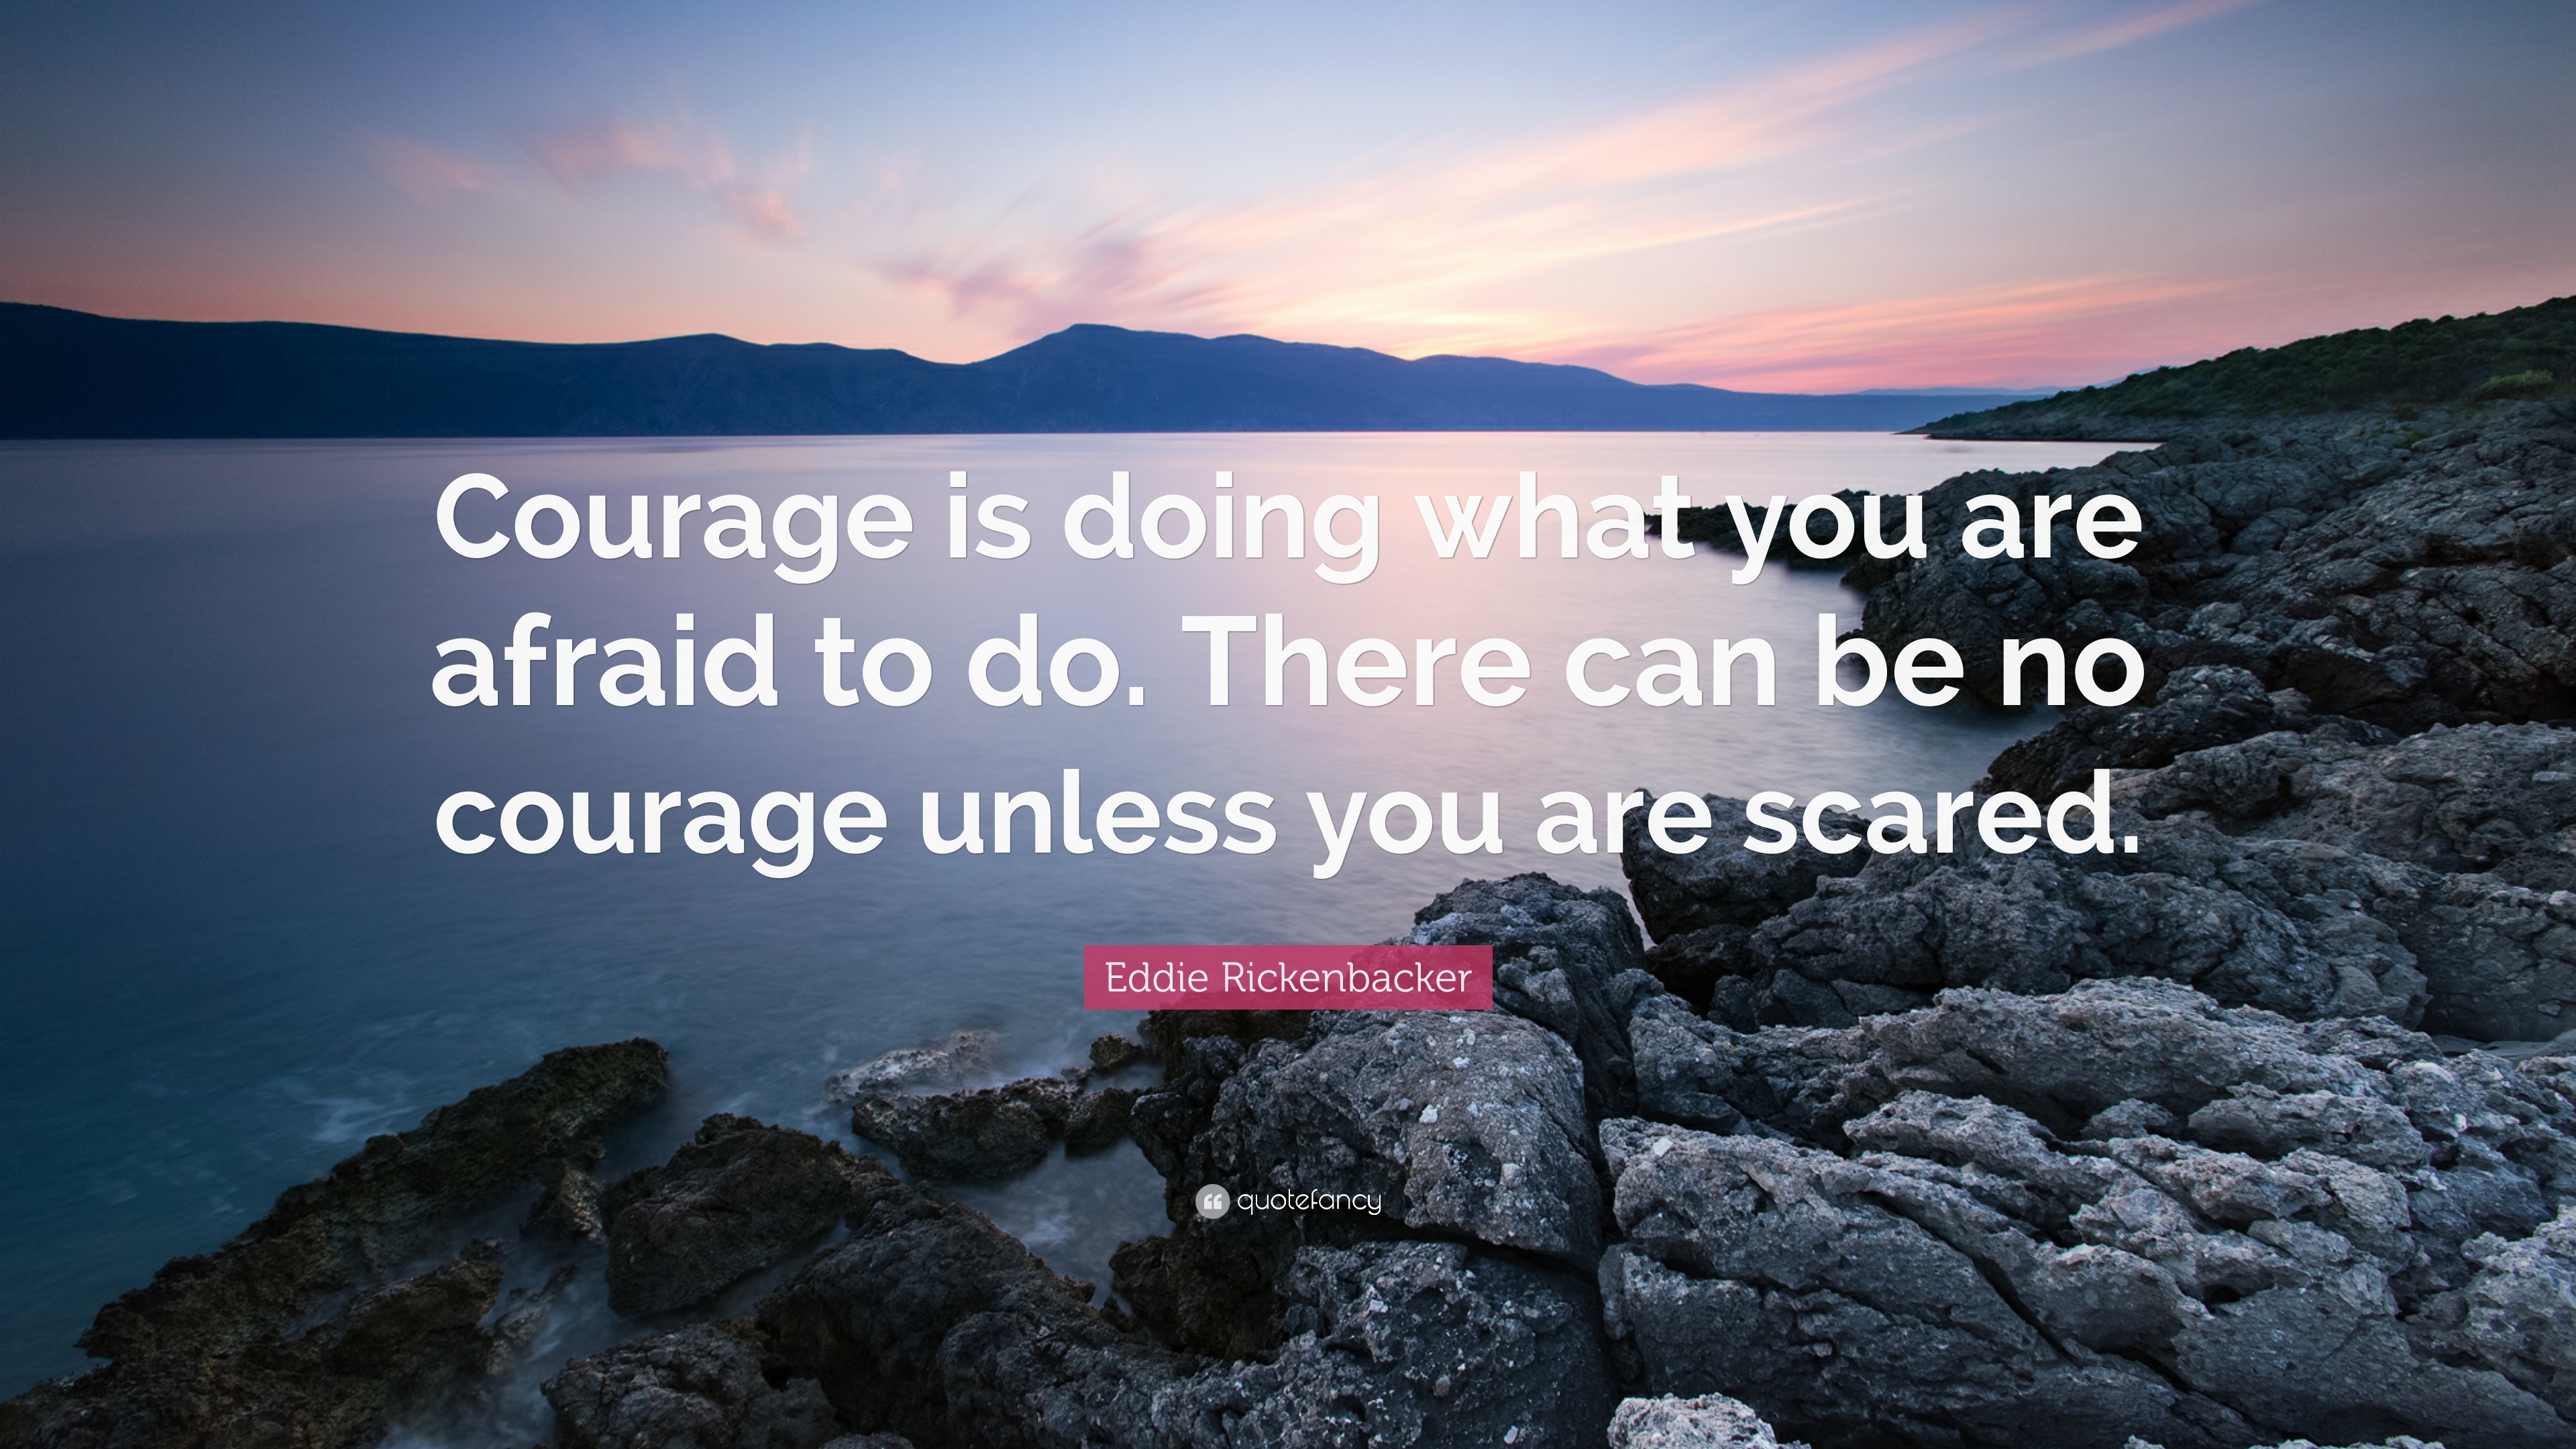 Eddie Rickenbacker Quote: "Courage is doing what you are afraid to do ...